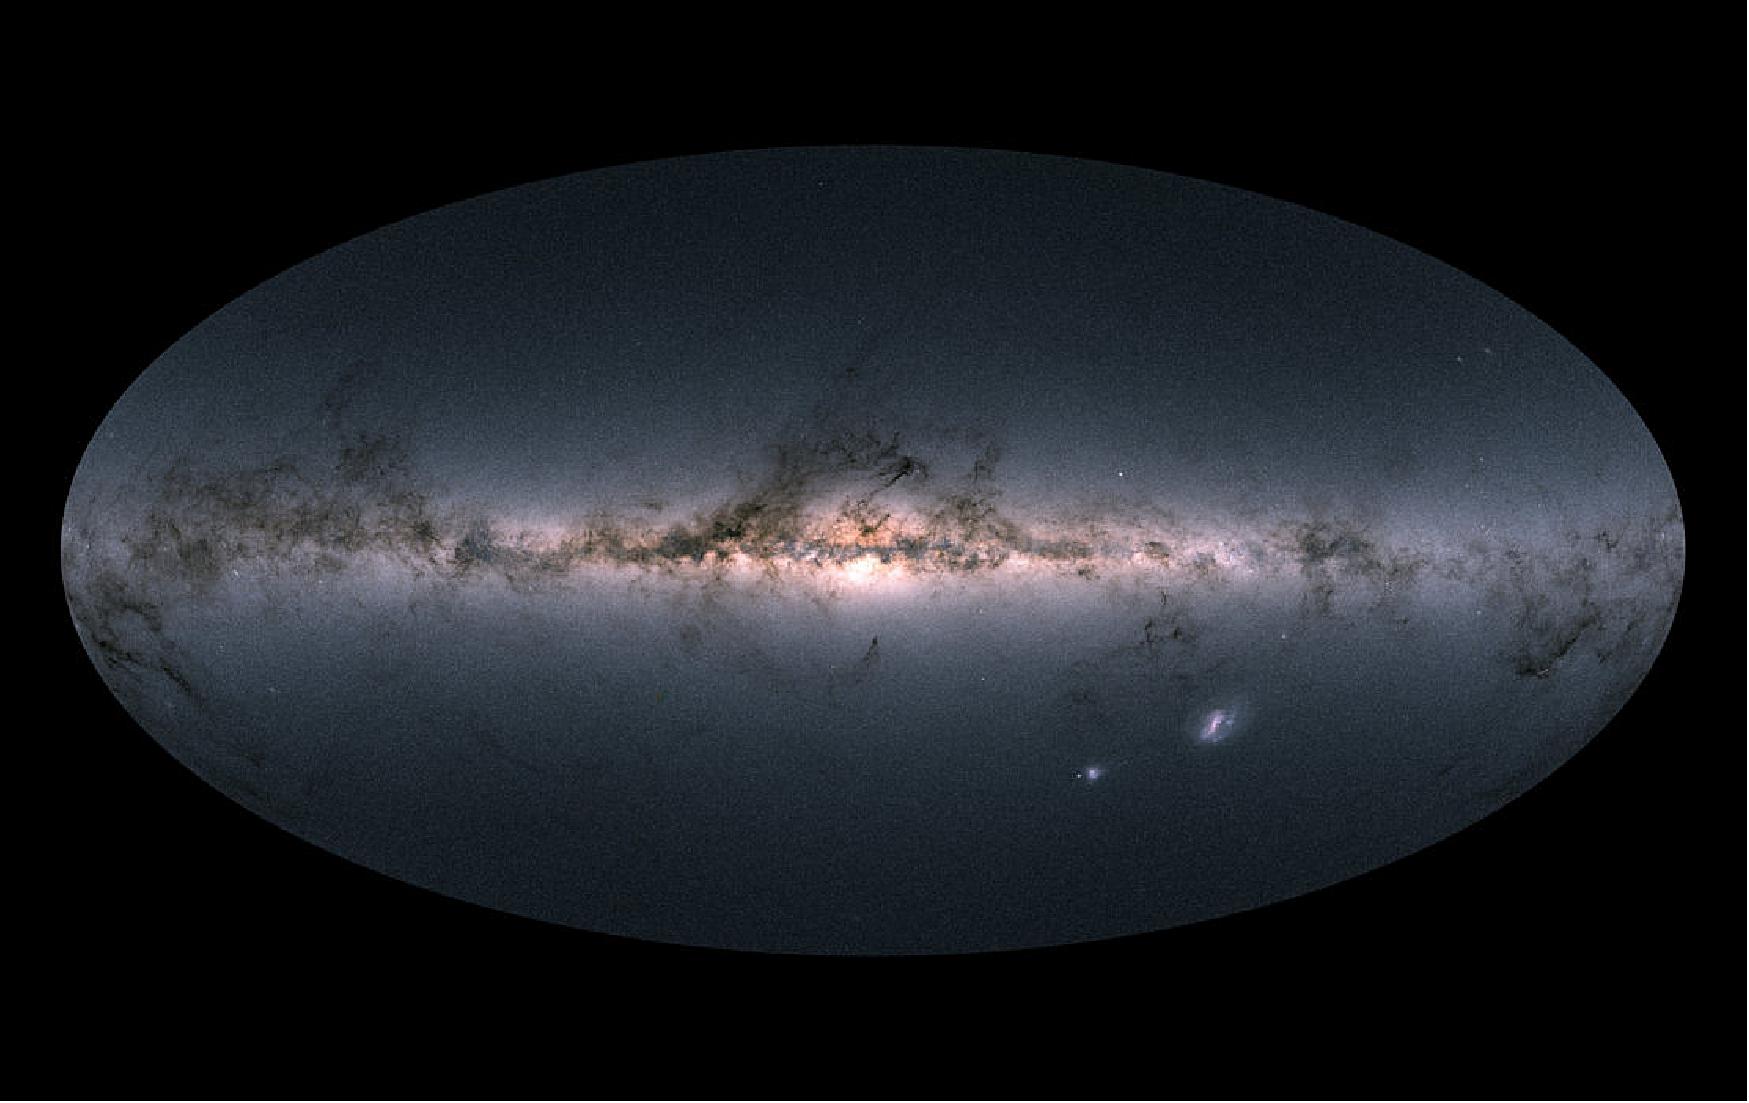 Figure 44: Gaia's all-sky view of our Milky Way Galaxy and neighboring galaxies, based on measurements of nearly 1.7 billion stars. The map shows the total brightness and color of stars observed by the ESA satellite in each portion of the sky between July 2014 and May 2016 (image credit: ESA/Gaia/DPAC) 44) Acknowledgement: Gaia Data Processing and Analysis Consortium (DPAC); A. Moitinho / A. F. Silva / M. Barros / C. Barata, University of Lisbon, Portugal; H. Savietto, Fork Research, Portugal.